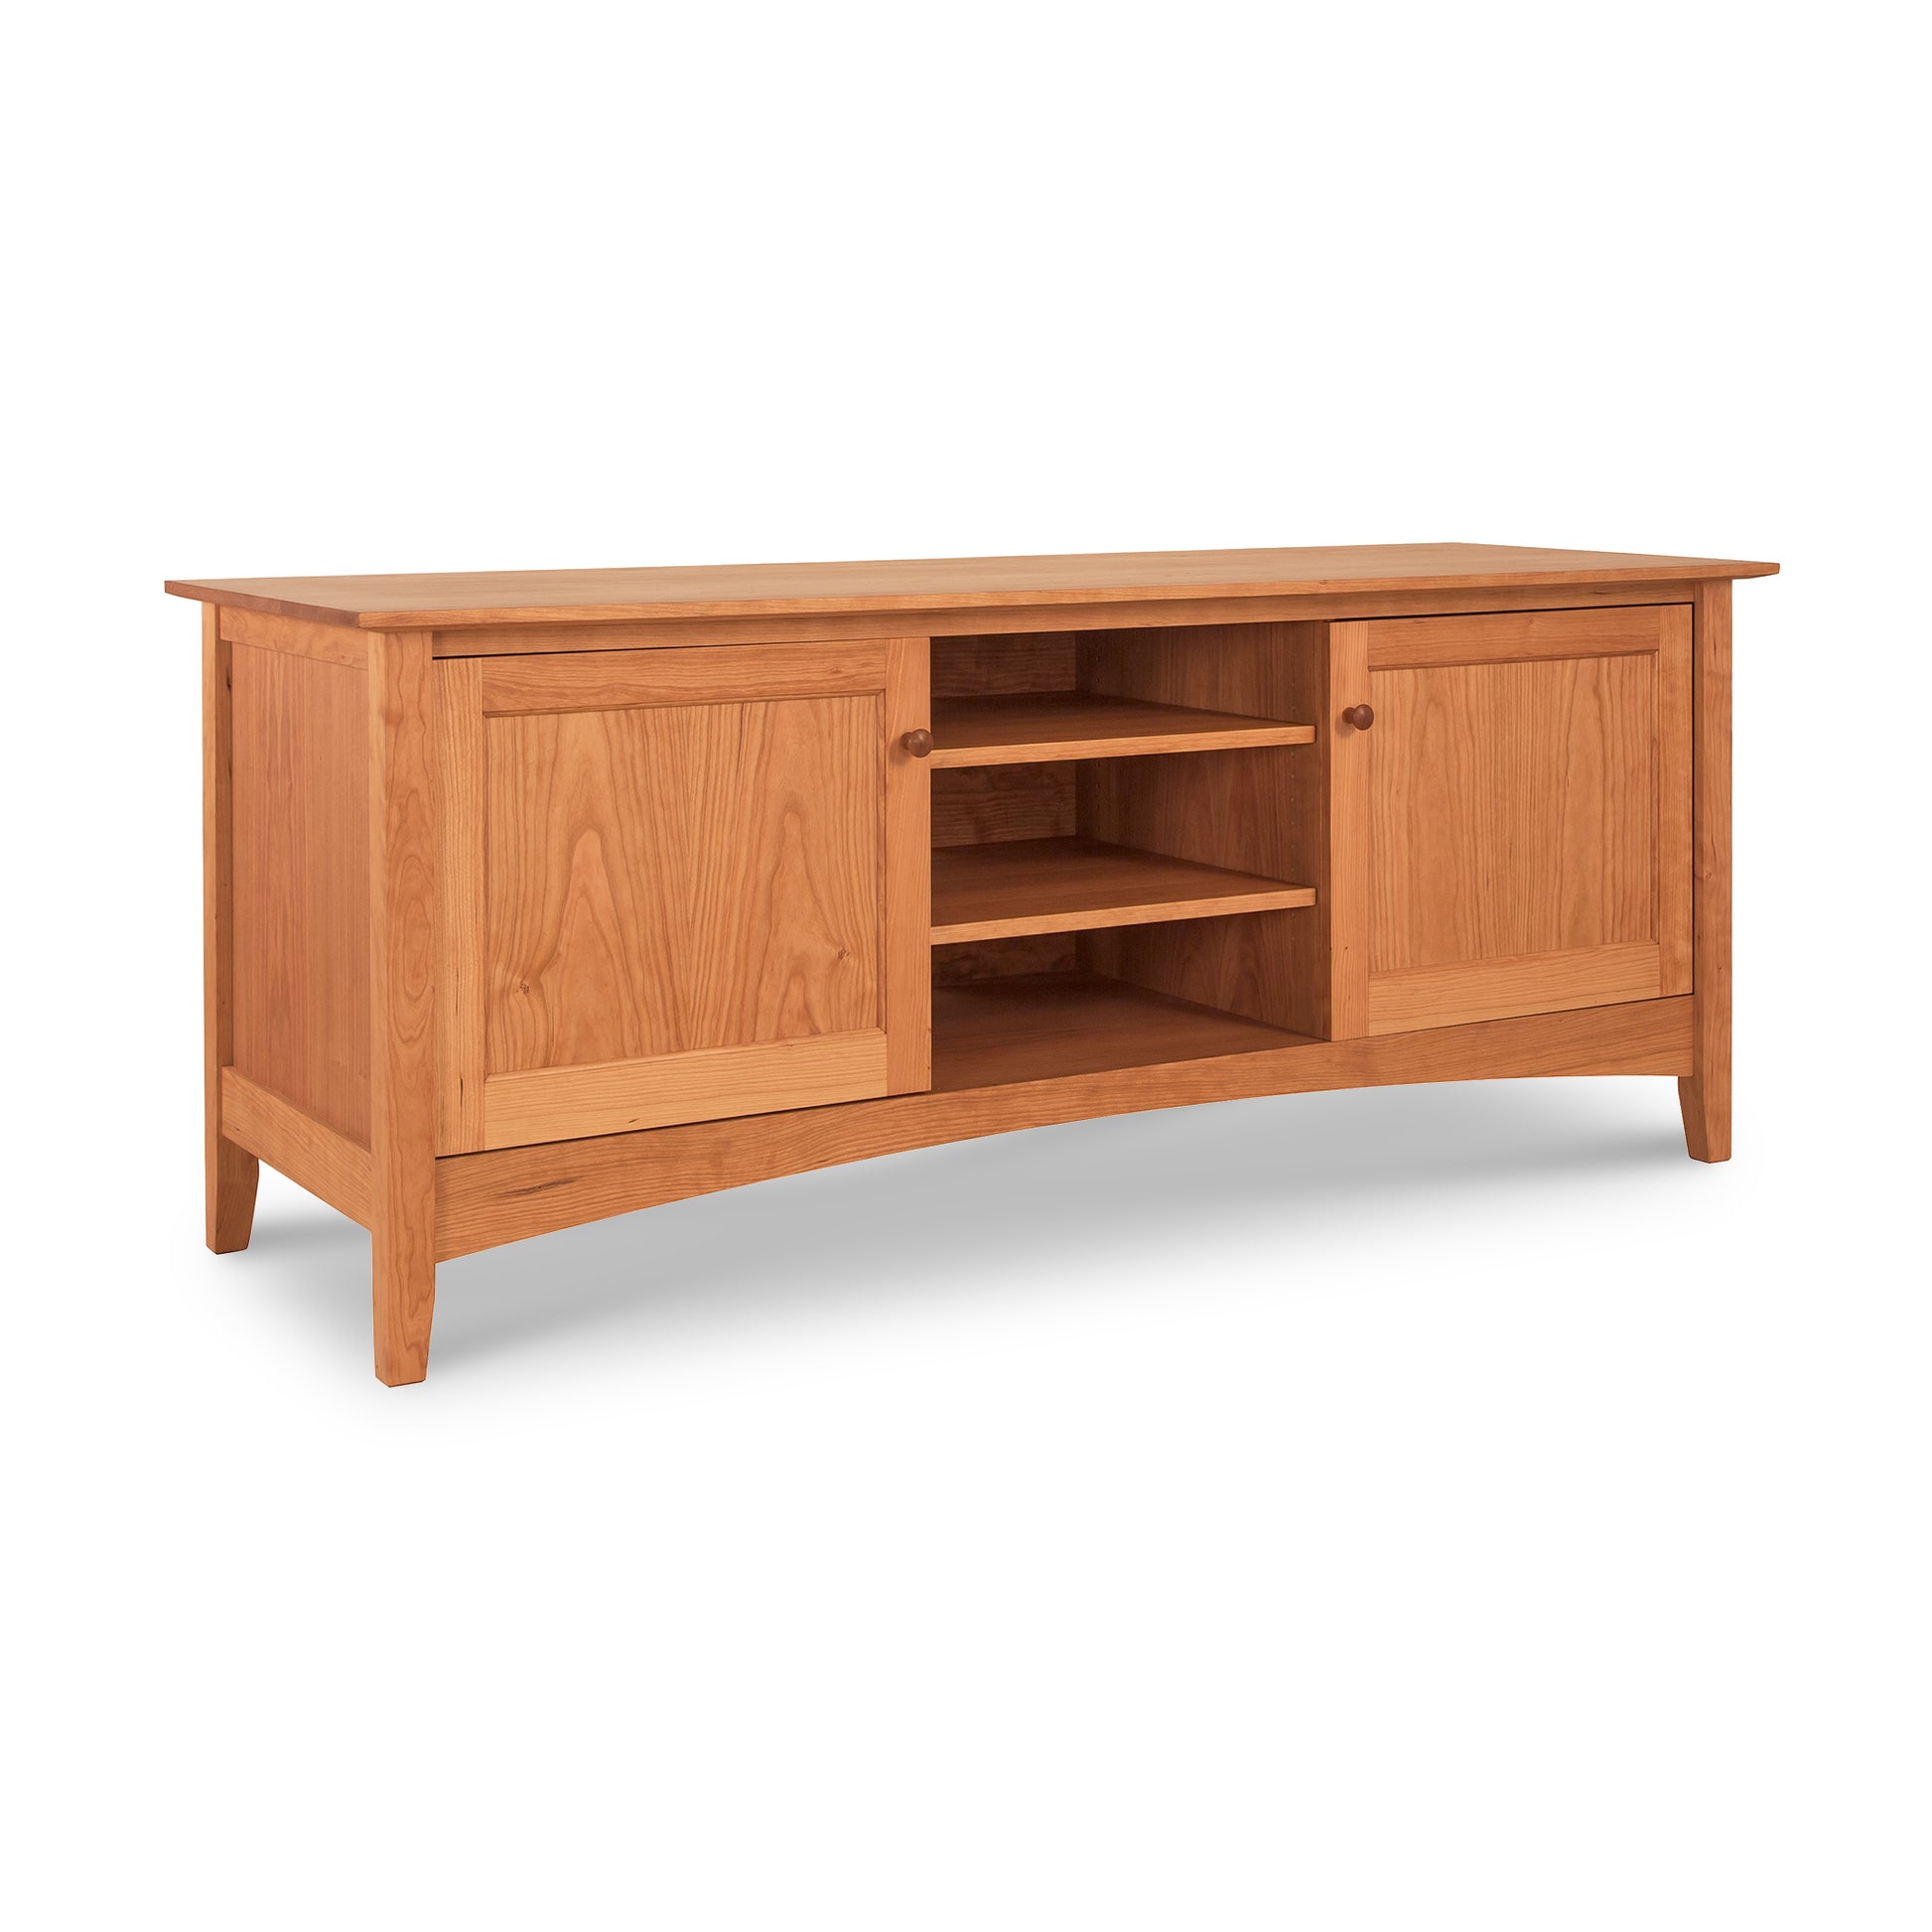 Maple Corner Woodworks American Shaker 67" TV Stand with open shelving and closed cabinets on a white background.